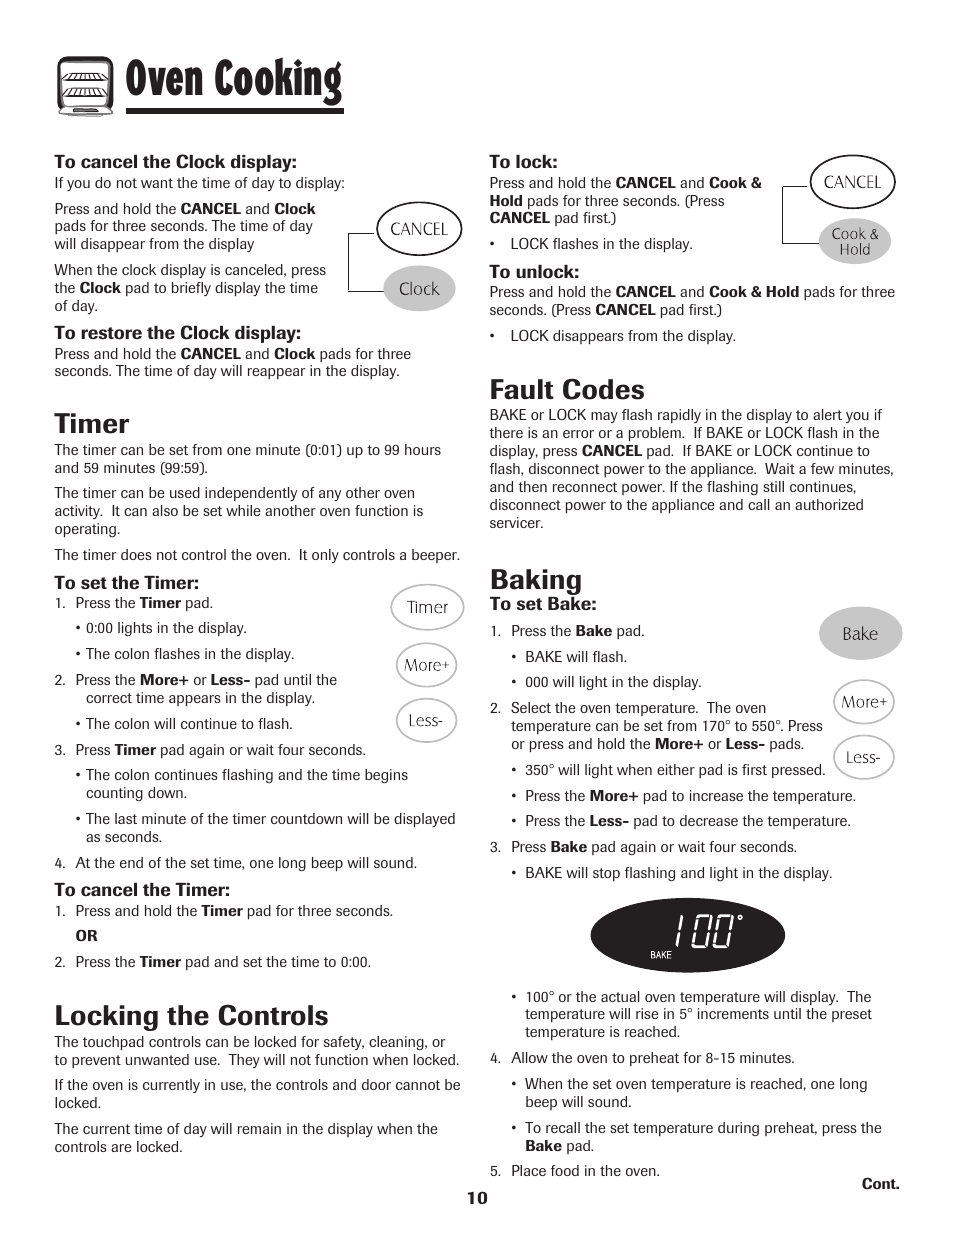 Oven cooking, Timer, Locking the controls | Fault codes, Baking | Maytag 500 Series User Manual | Page 11 / 24